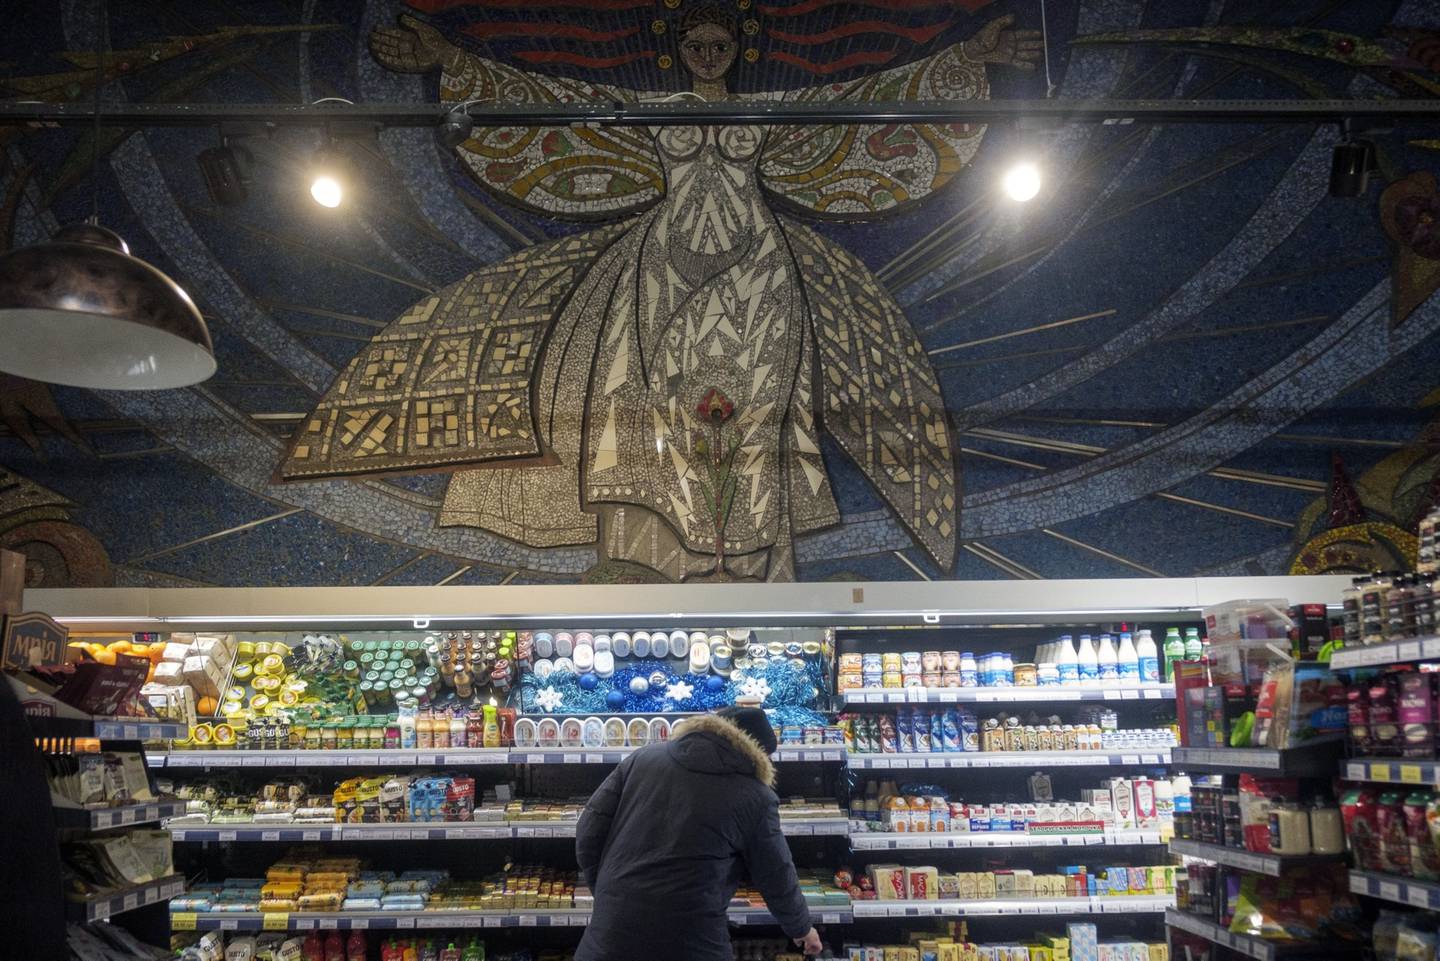 A Soviet era mosaic above an aisle of a grocery store in Mariupol.dfd